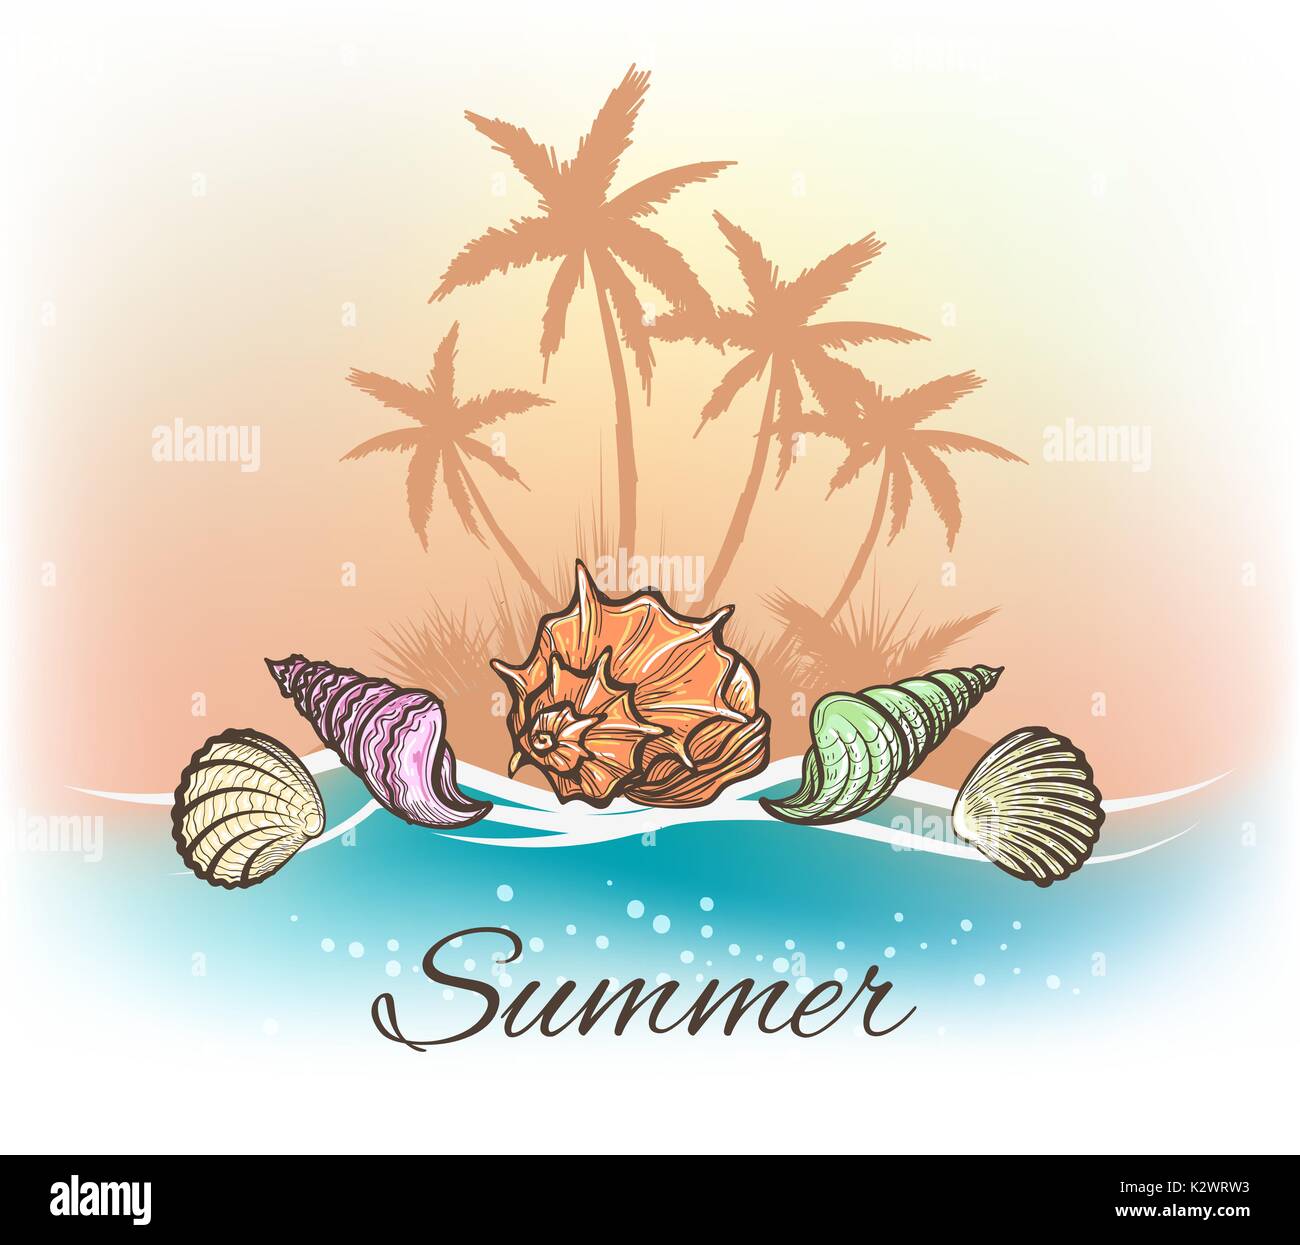 Summer banner. Sea shells and palm trees. Vector illustration Stock Vector